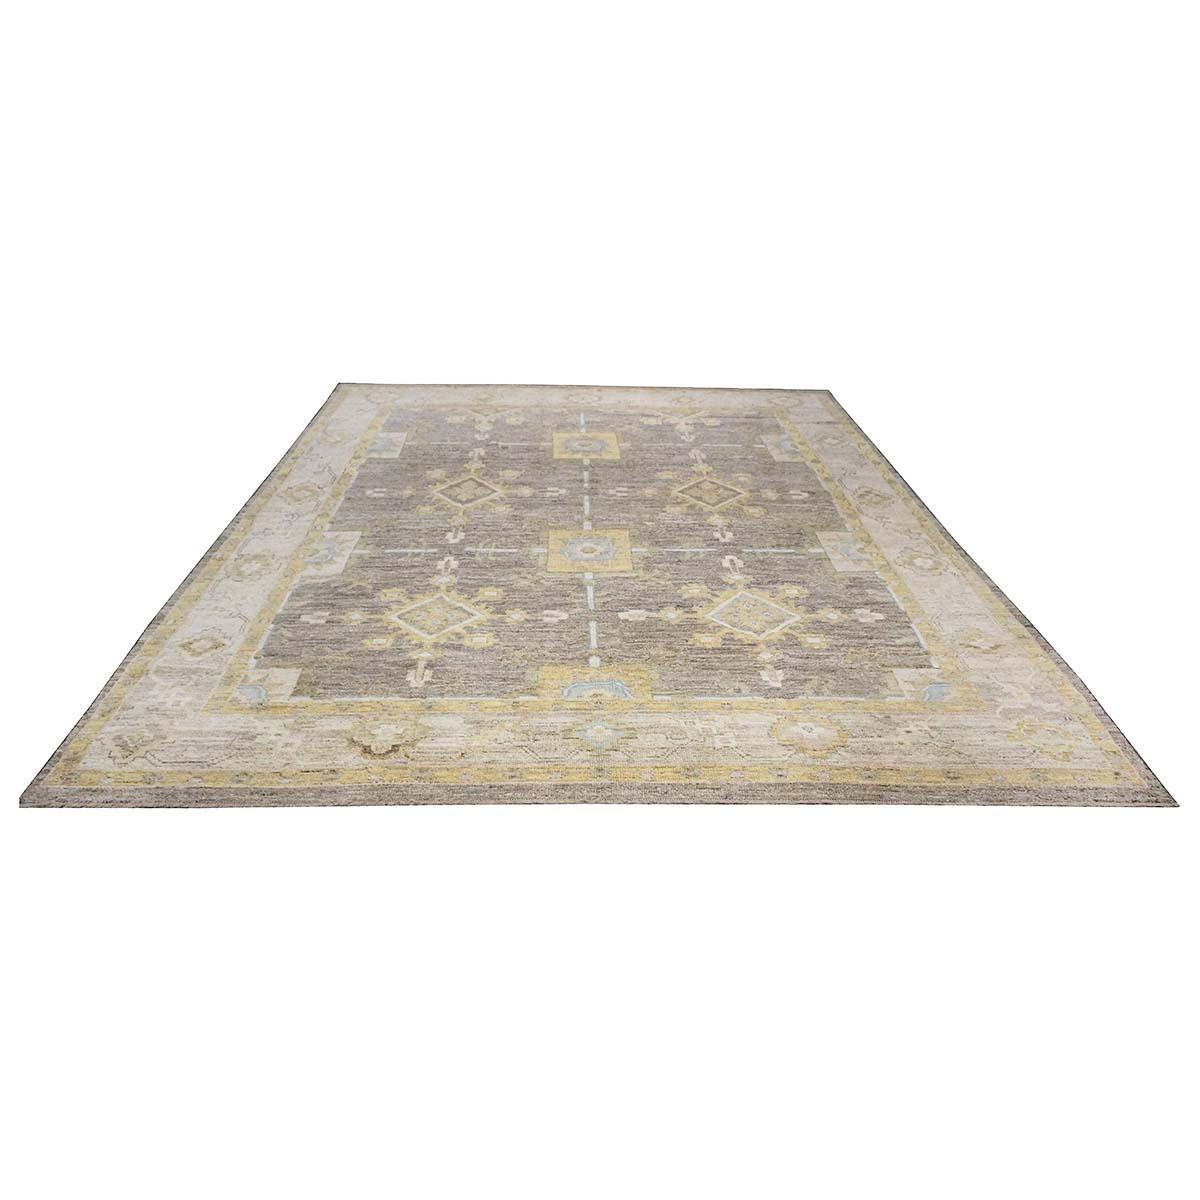 21st Century Turkish Oushak 10x13 Tuape, Ivory, & Yellow Handmade Area Rug In Good Condition For Sale In Houston, TX